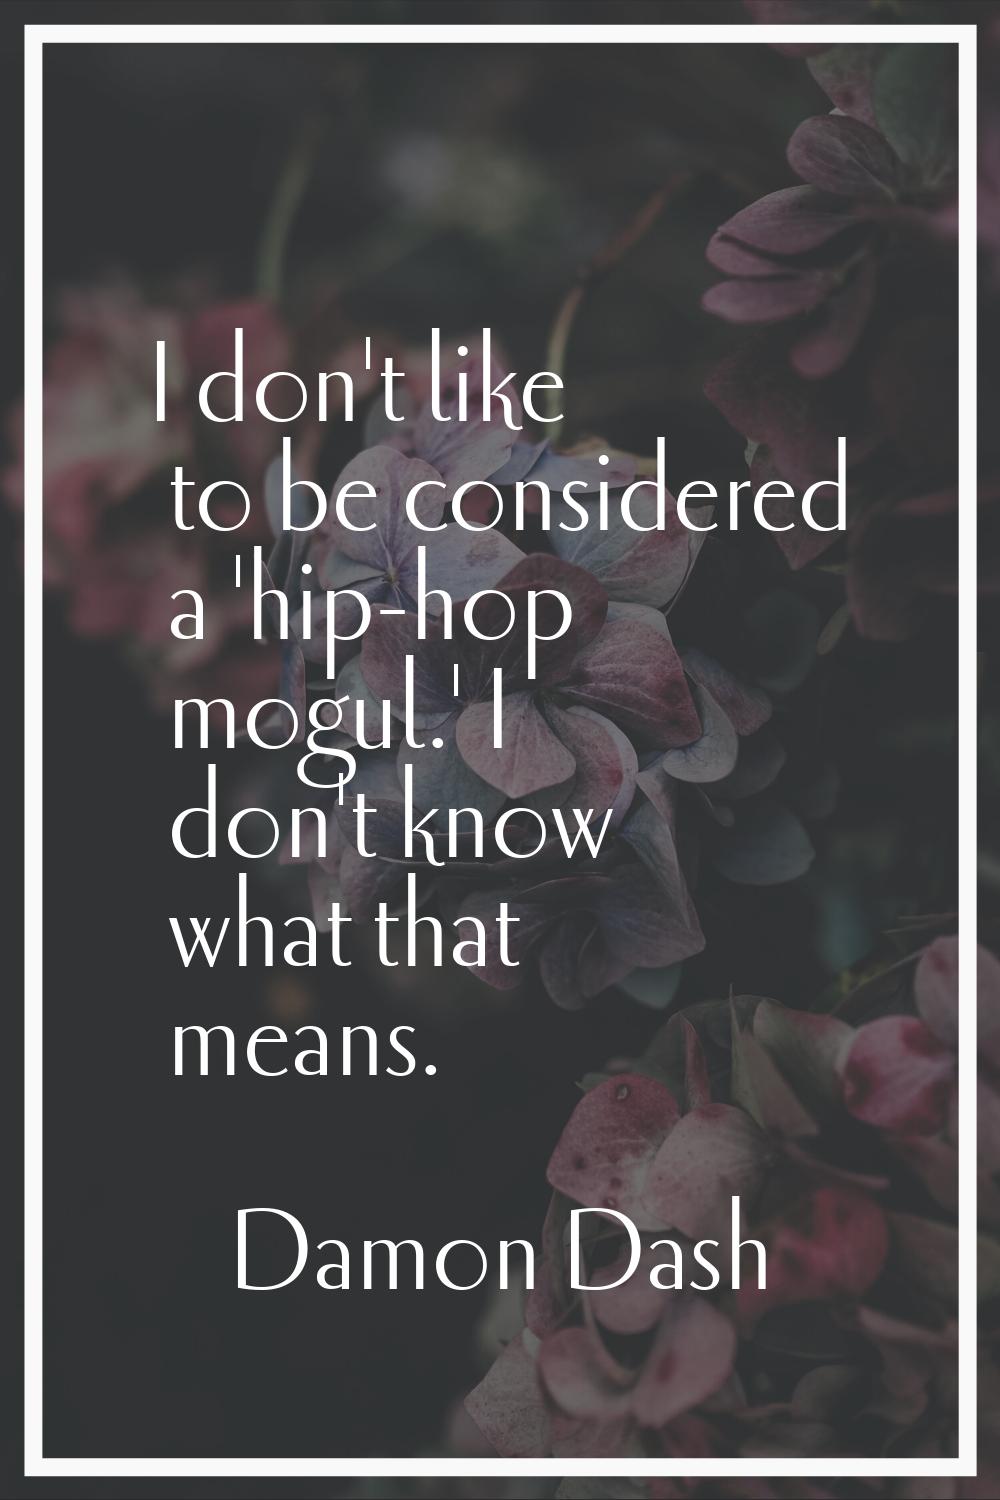 I don't like to be considered a 'hip-hop mogul.' I don't know what that means.